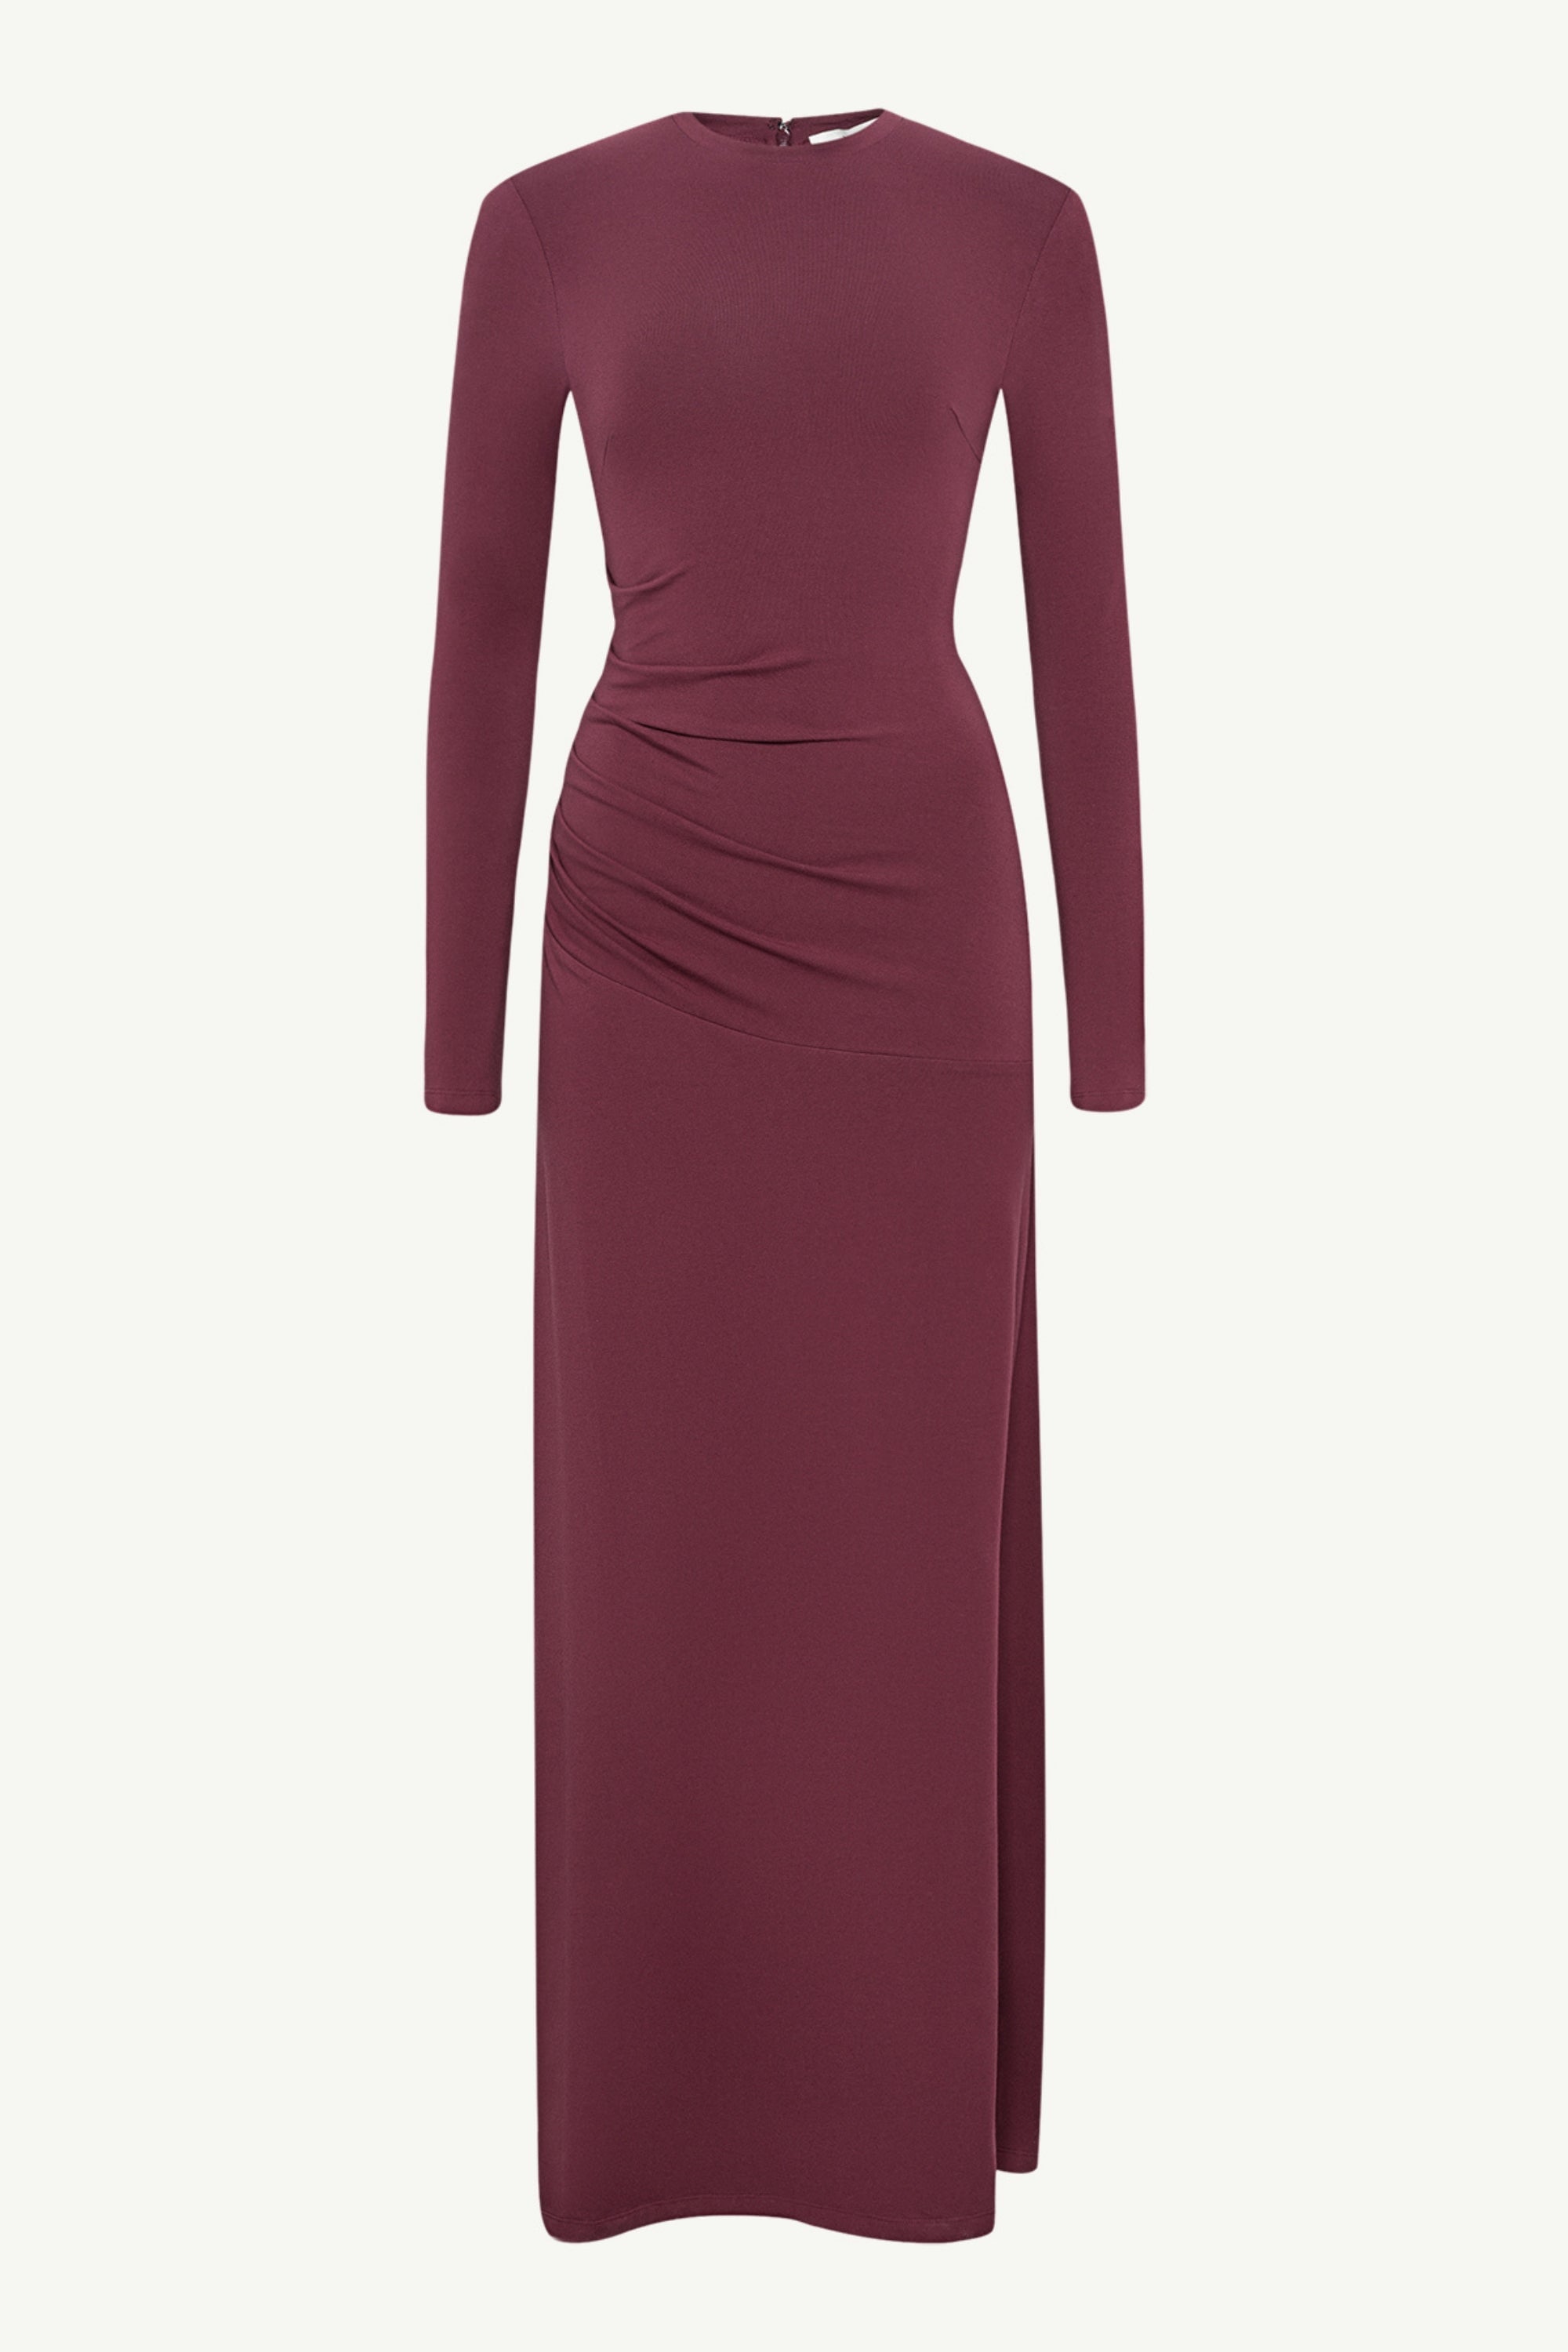 Natalie Rouched Jersey Maxi Dress - Port Royale Clothing Veiled 